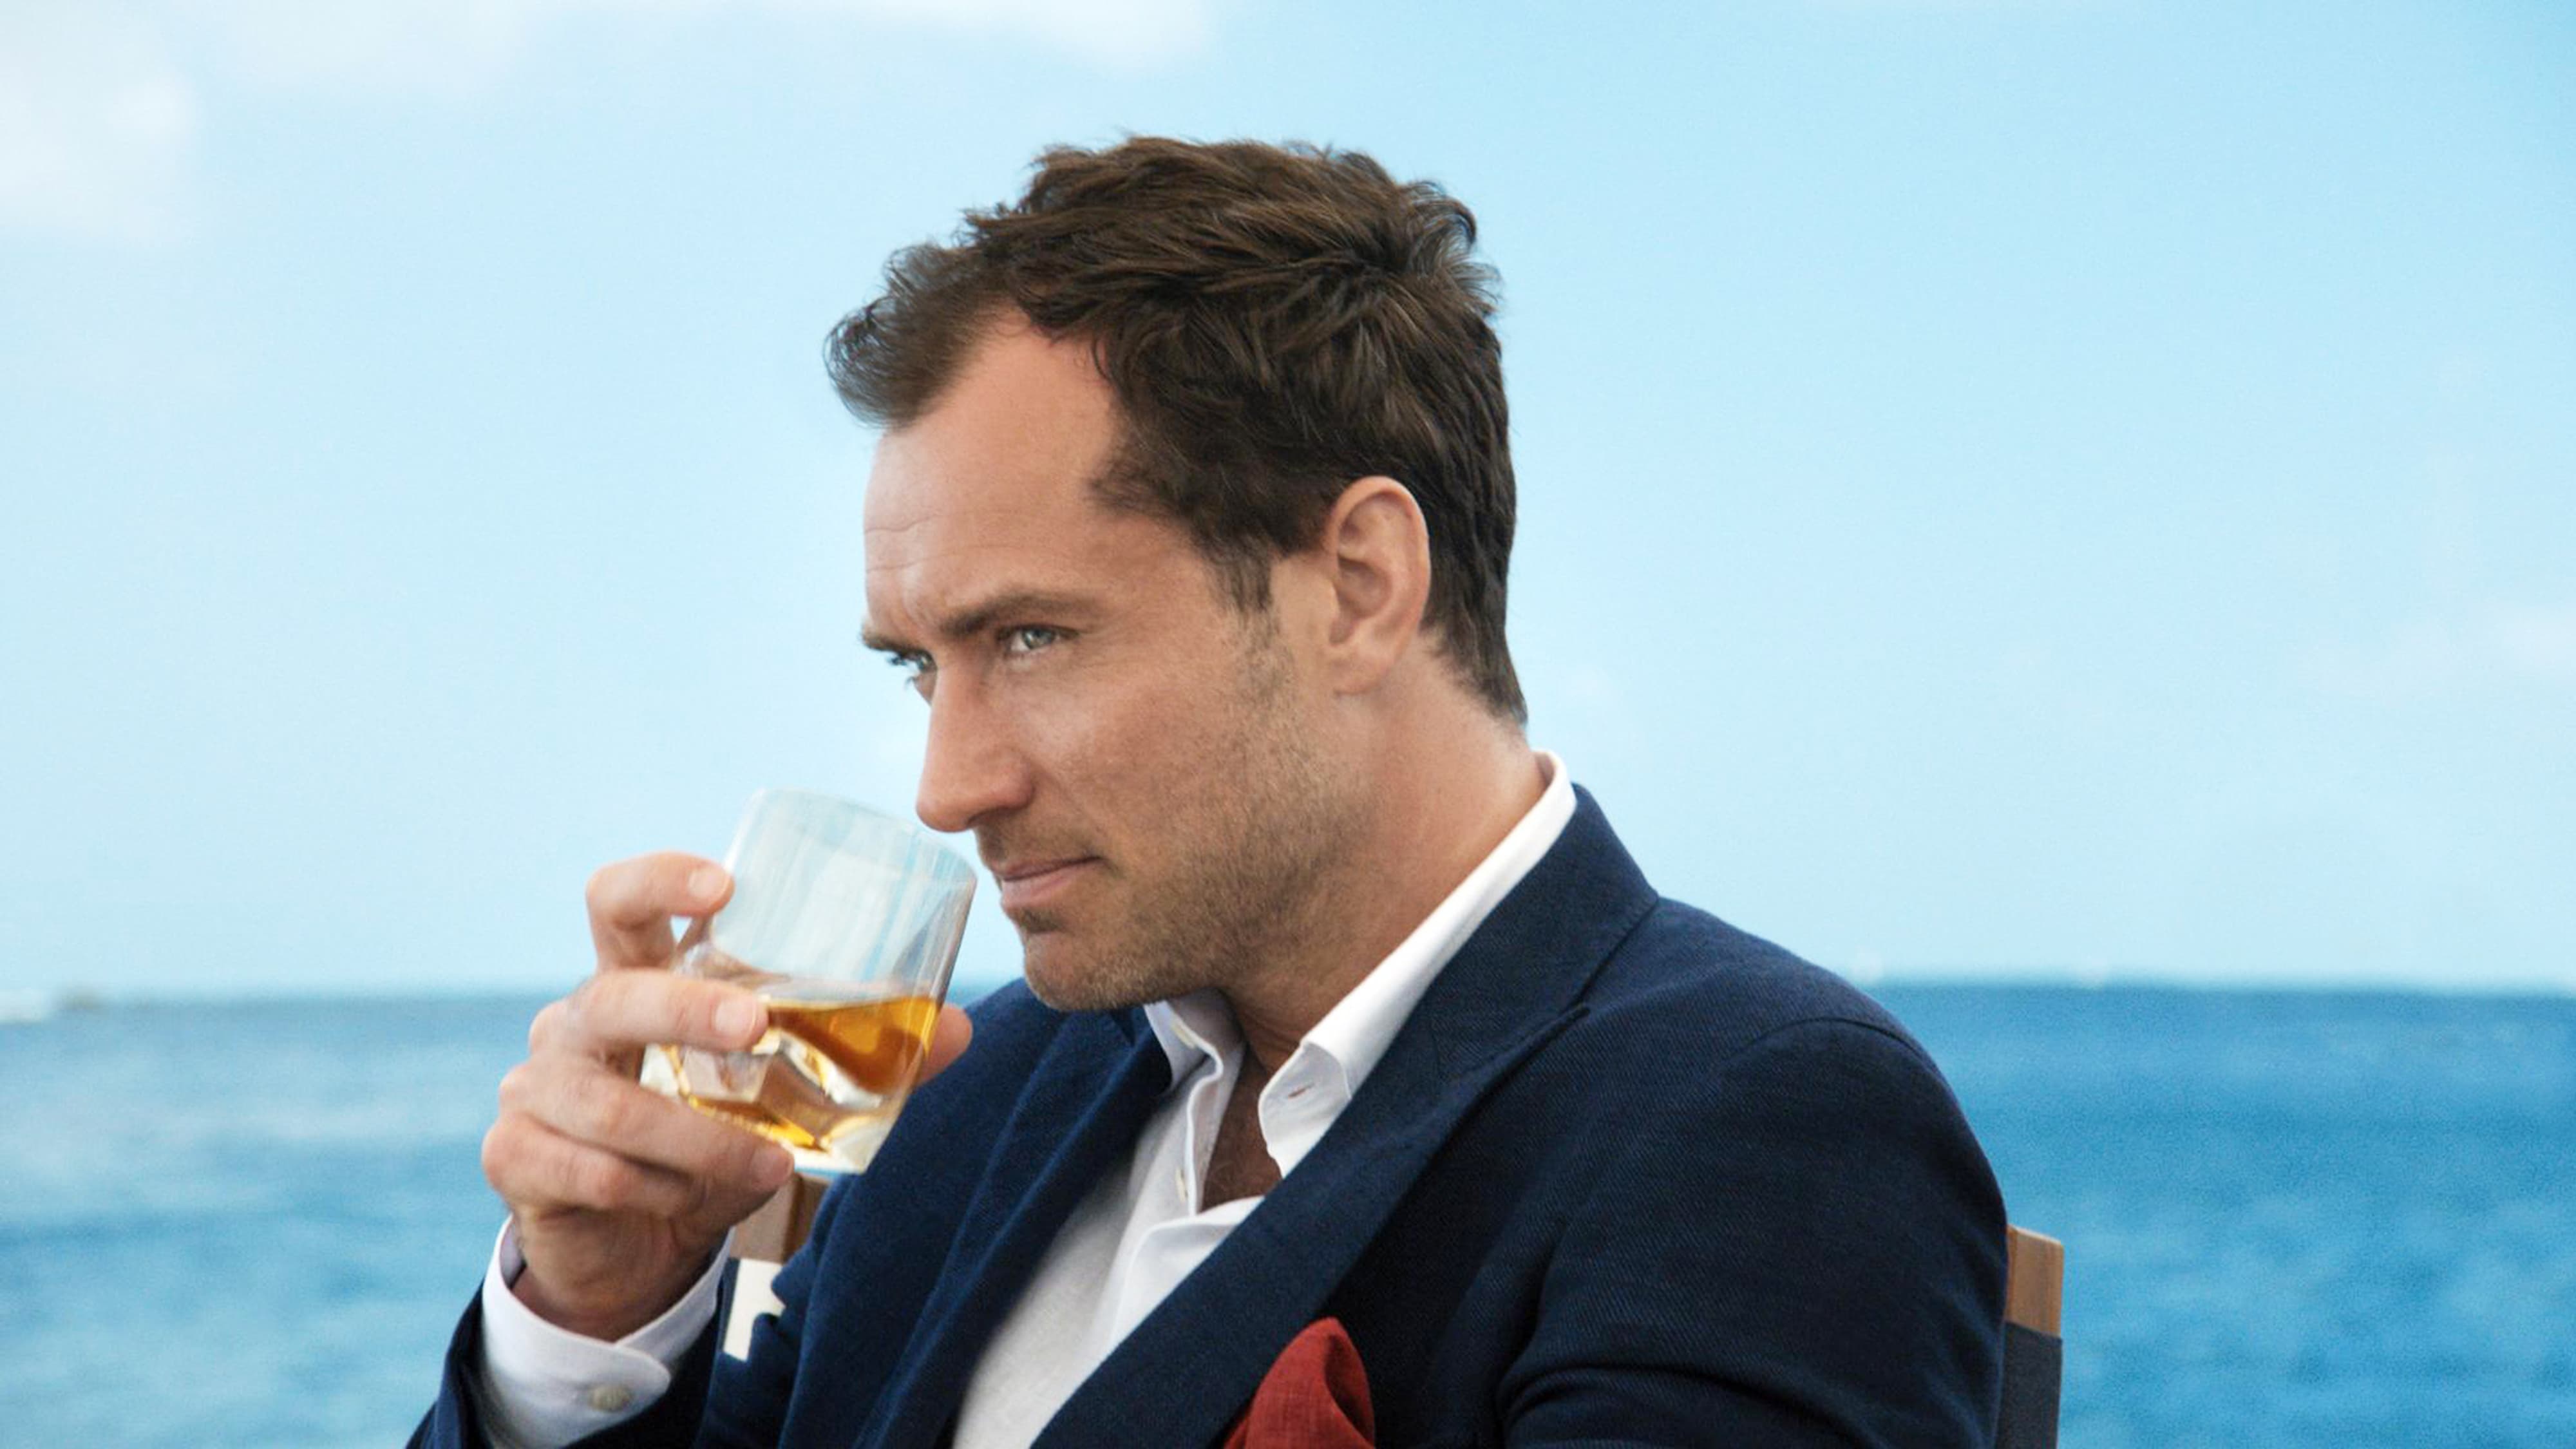 Jude Law in a Johnnie Walker Blue Label ad